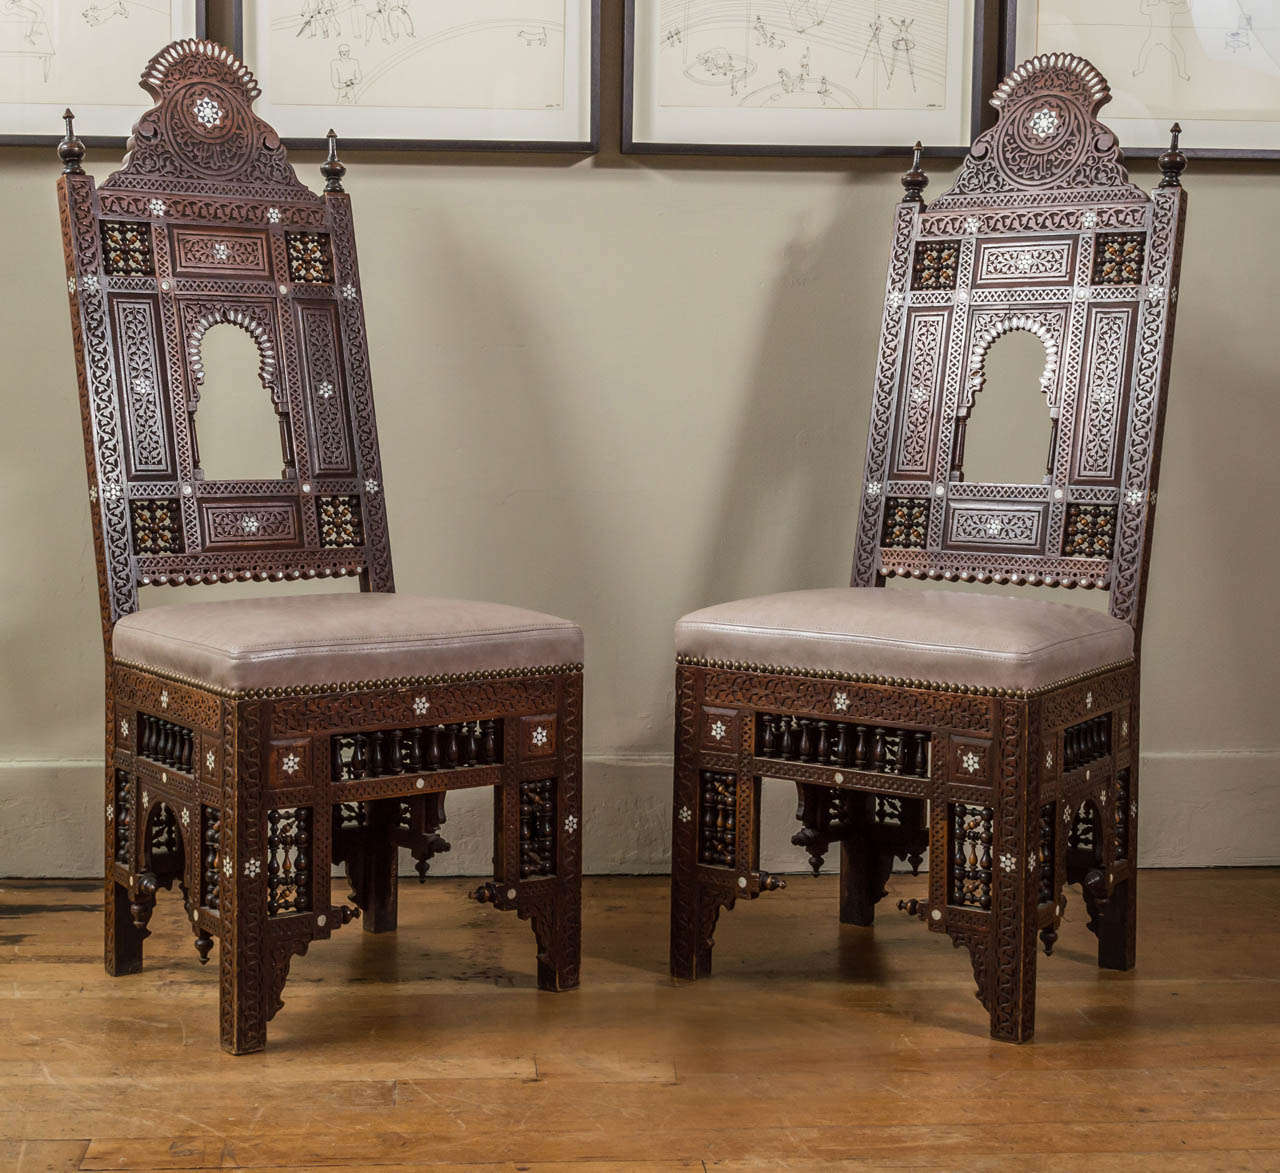 Mother-of-pearl inlaid carved wood side chairs with later leather seats and nailhead trim.